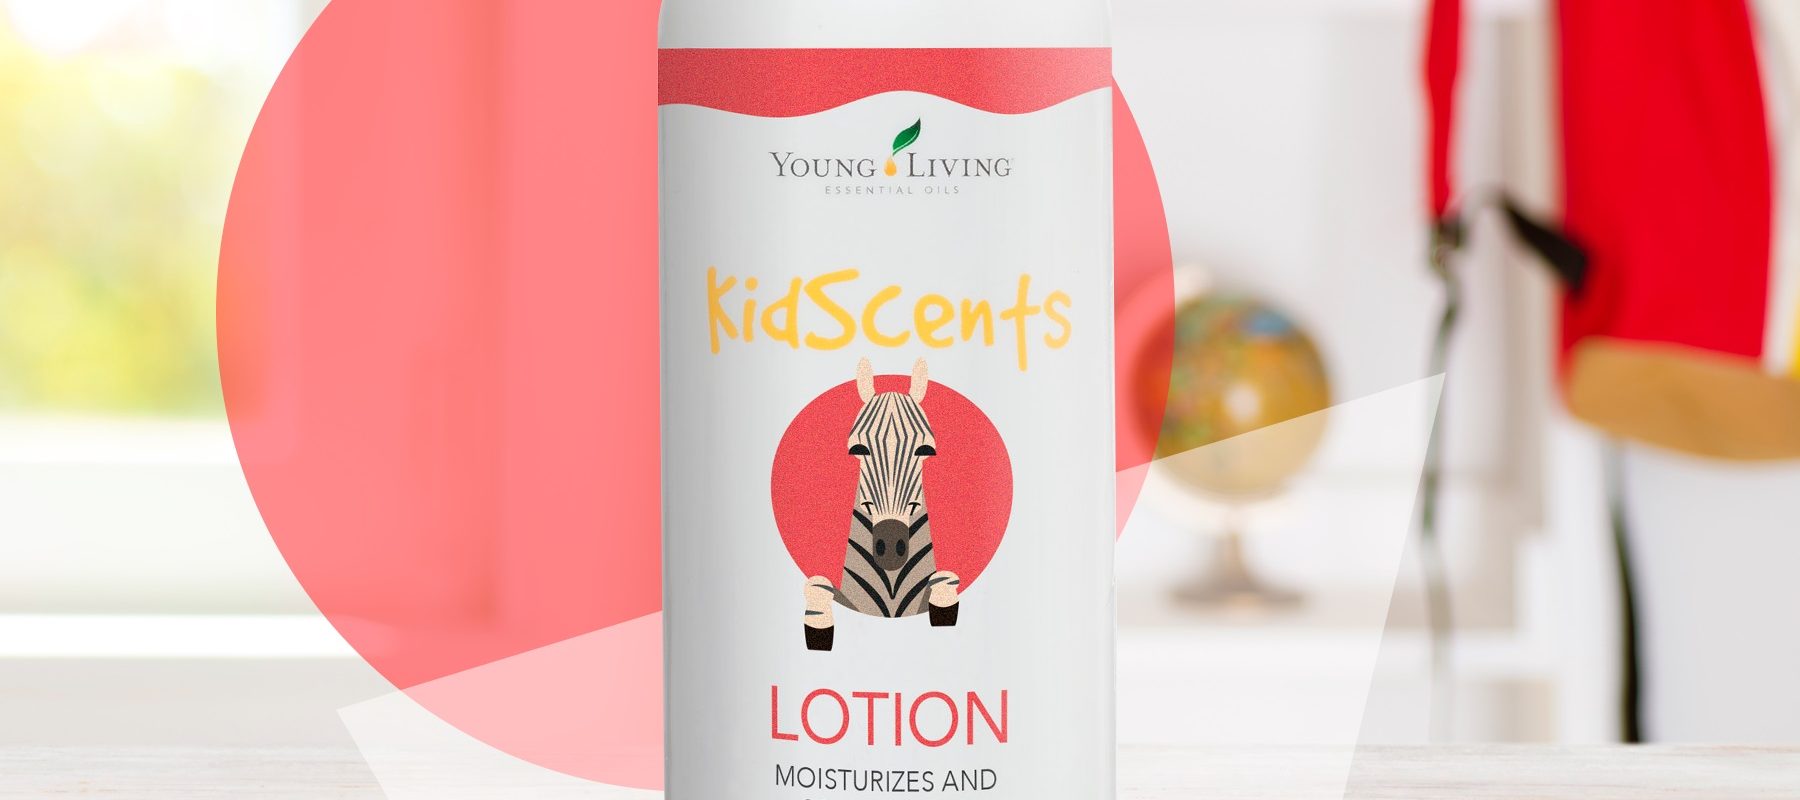 Great Skin Care Tips Using KidScents Lotion and Tender Tush